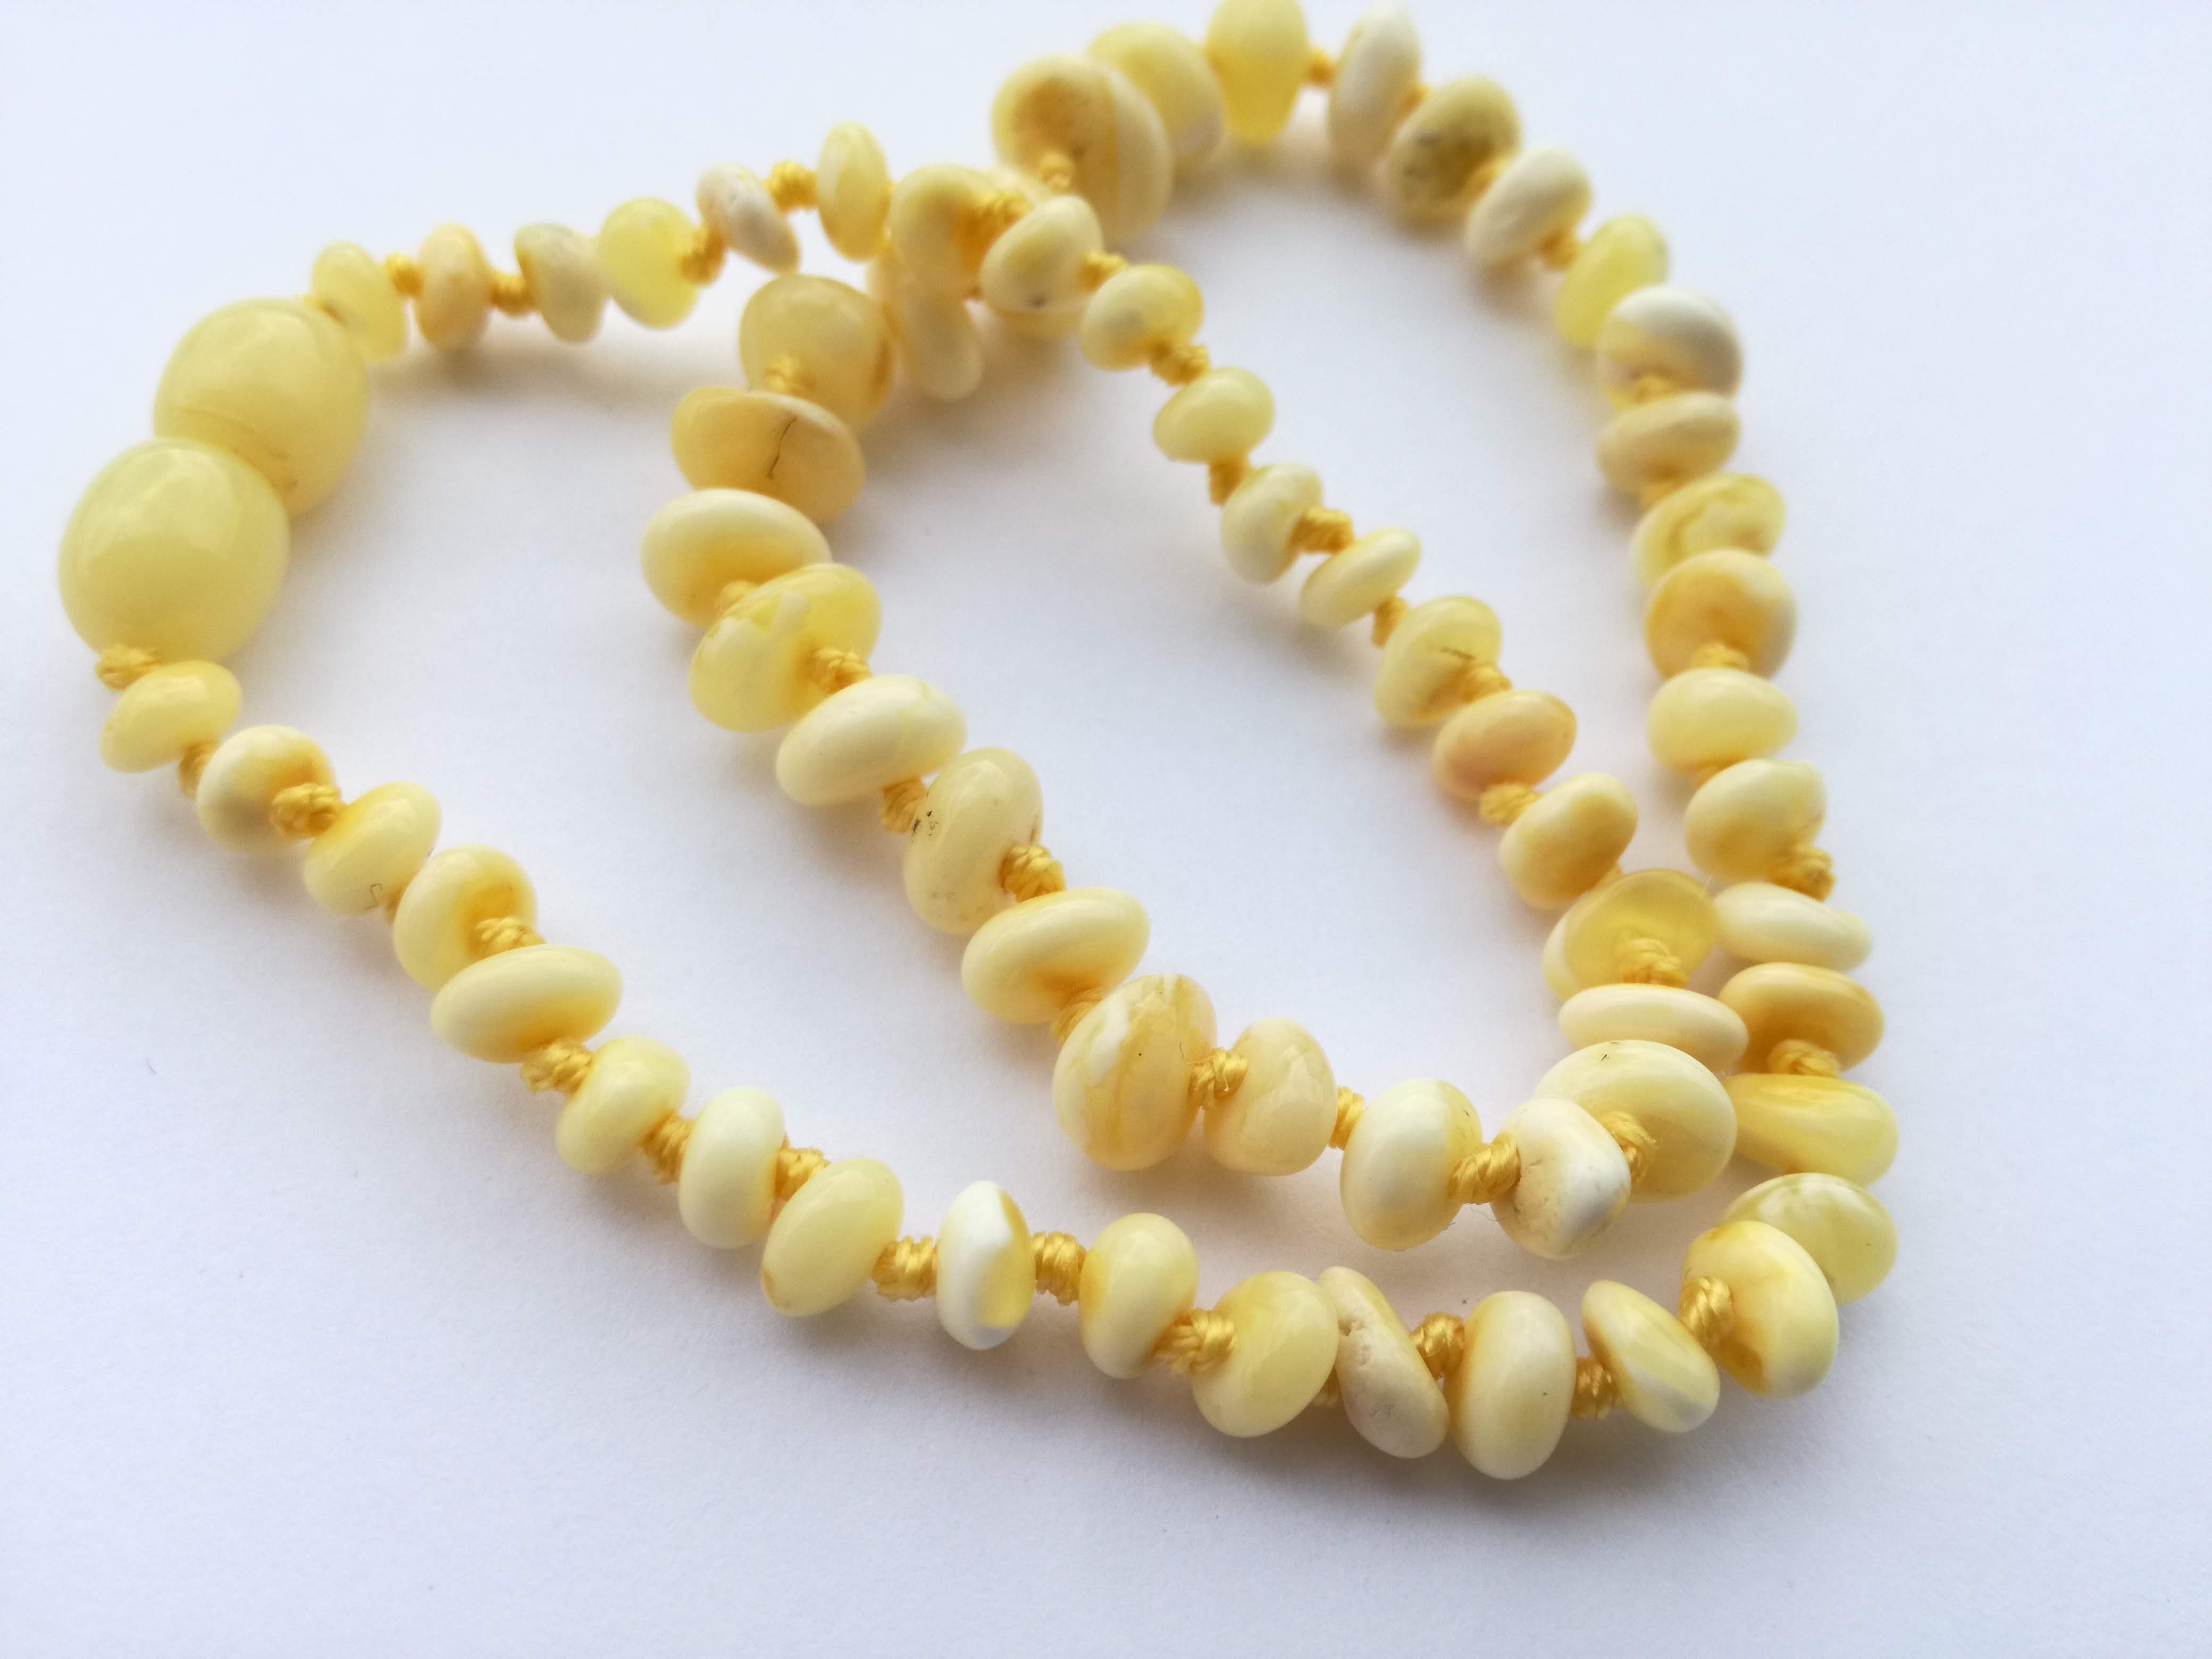 amber teething necklace, white and milky polished beads, premium product, limited edition, plastic screw clasp, healing, succinic acid, genuine baltic amber, safe for babies and nursing mums, made in poland